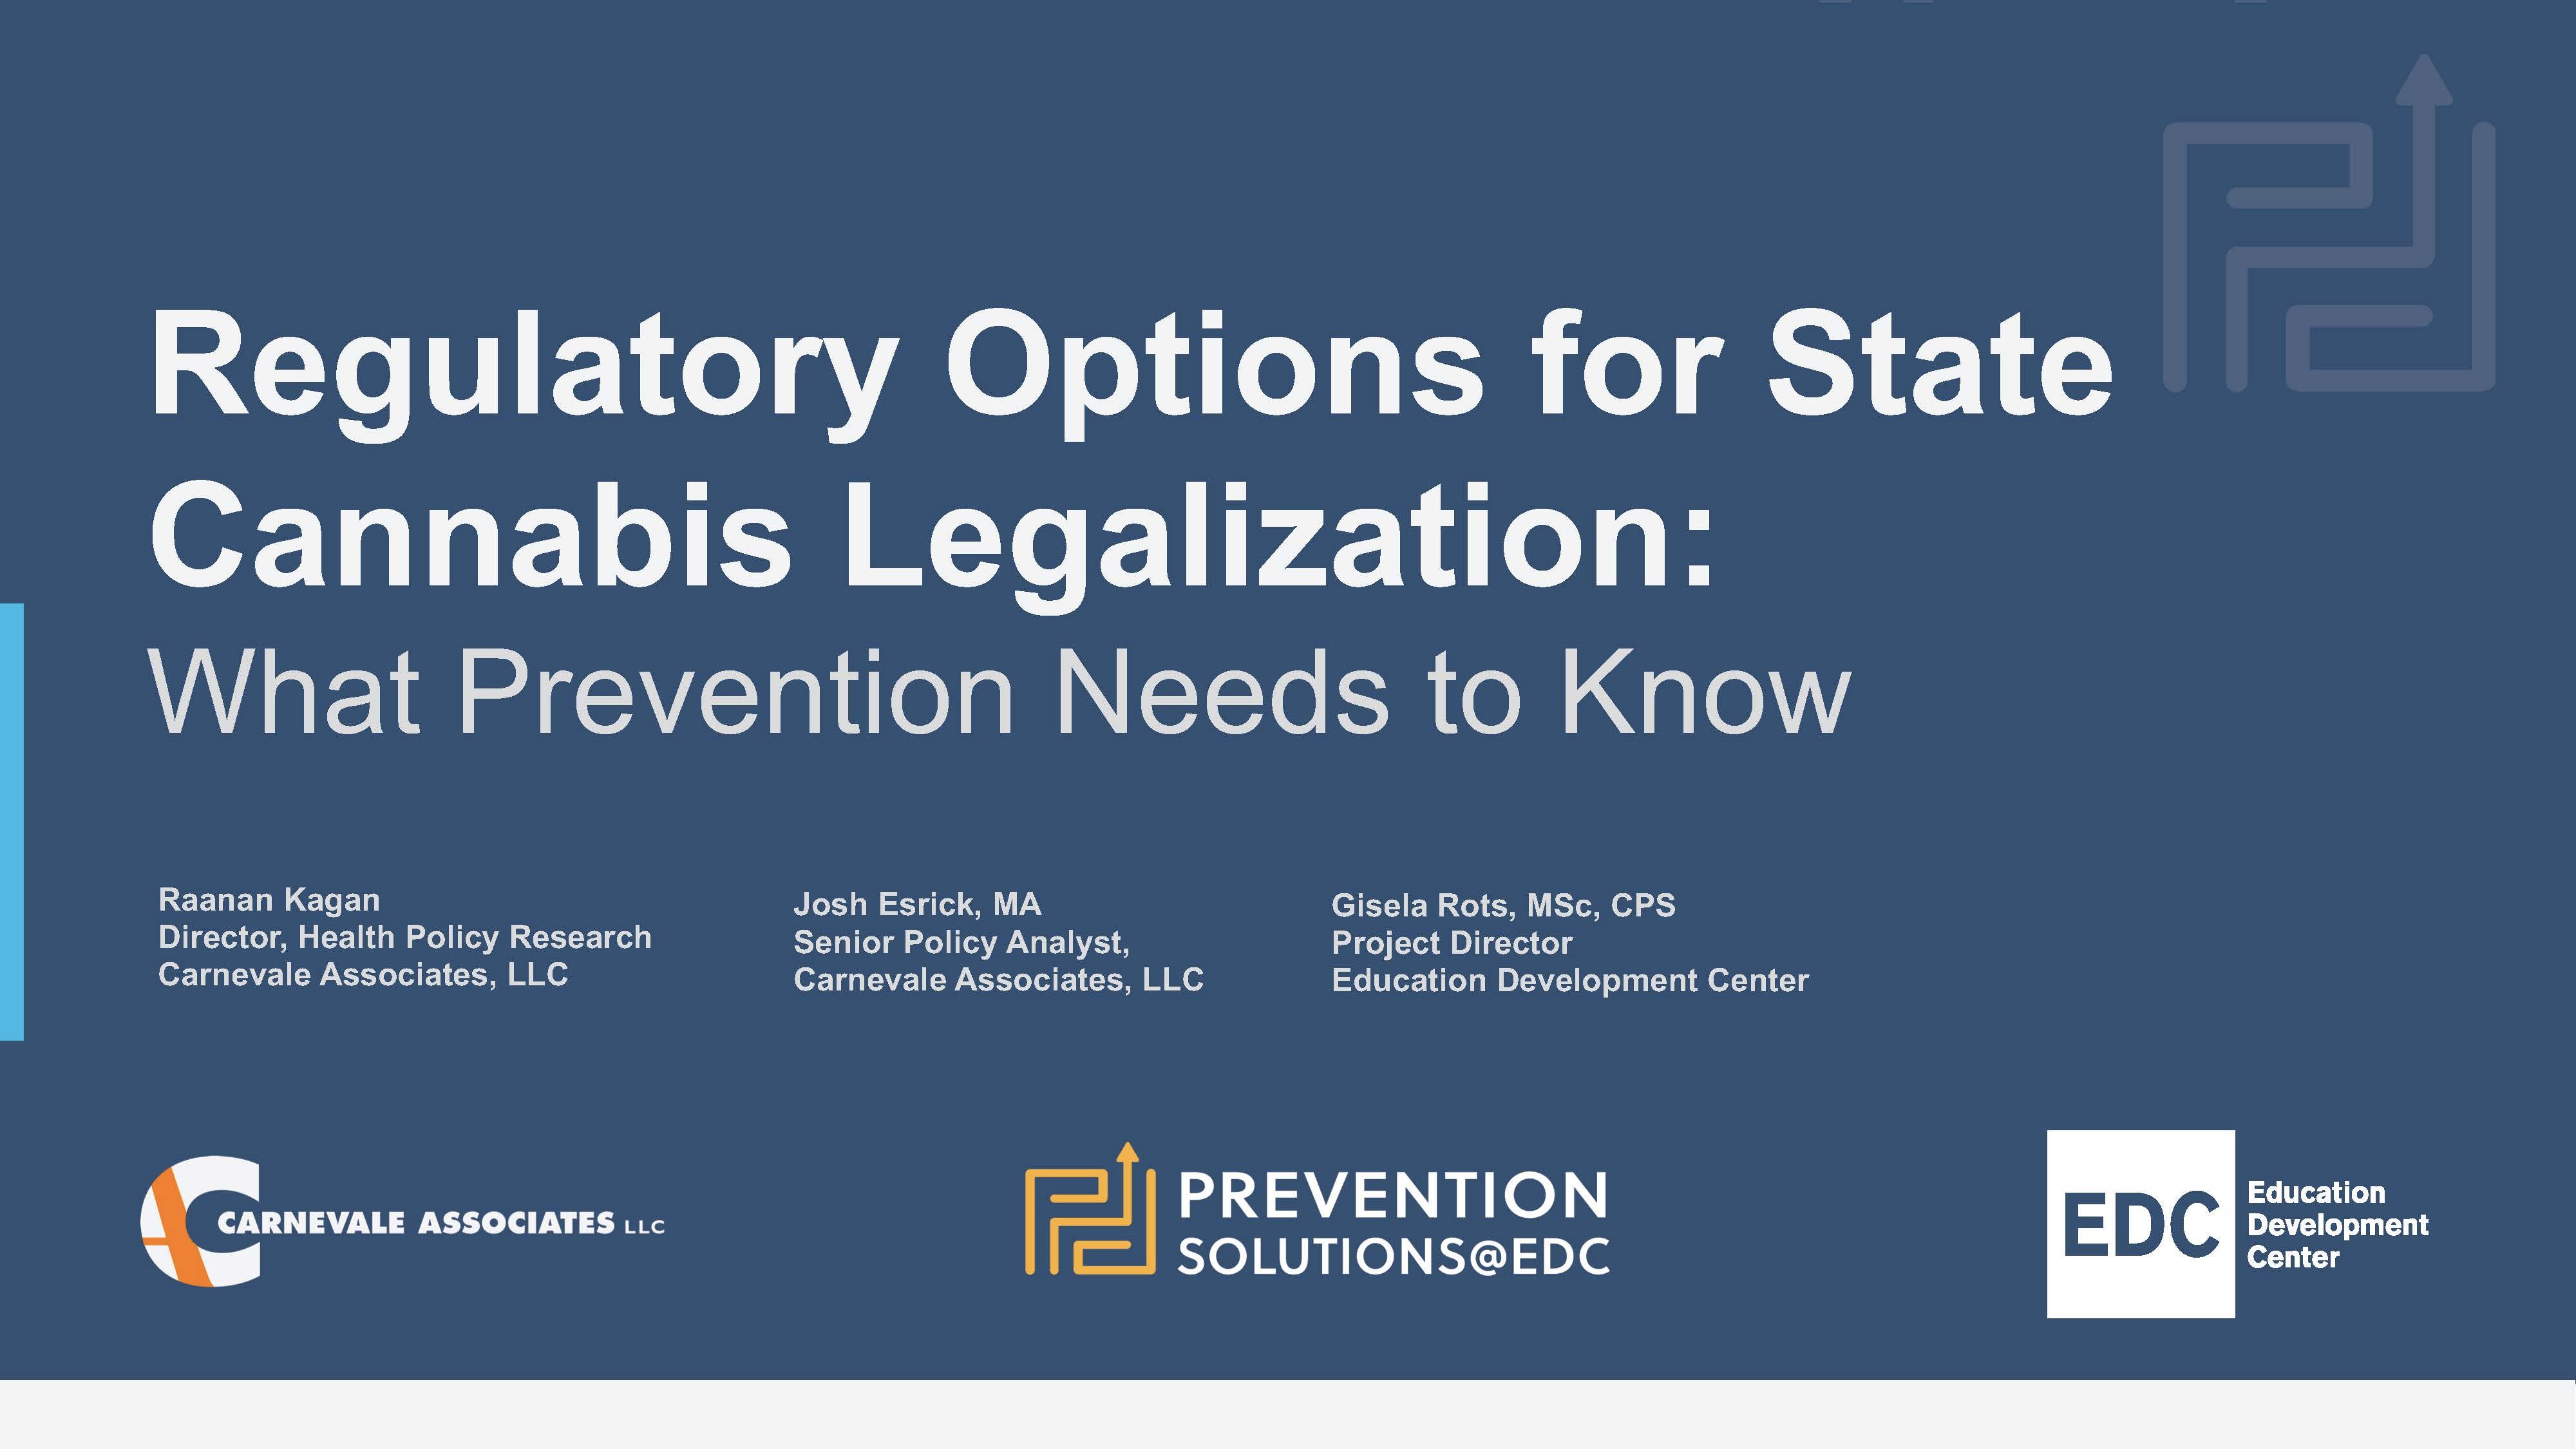 Regulatory Options for State Cannabis Legalization: What Prevention Needs to Know